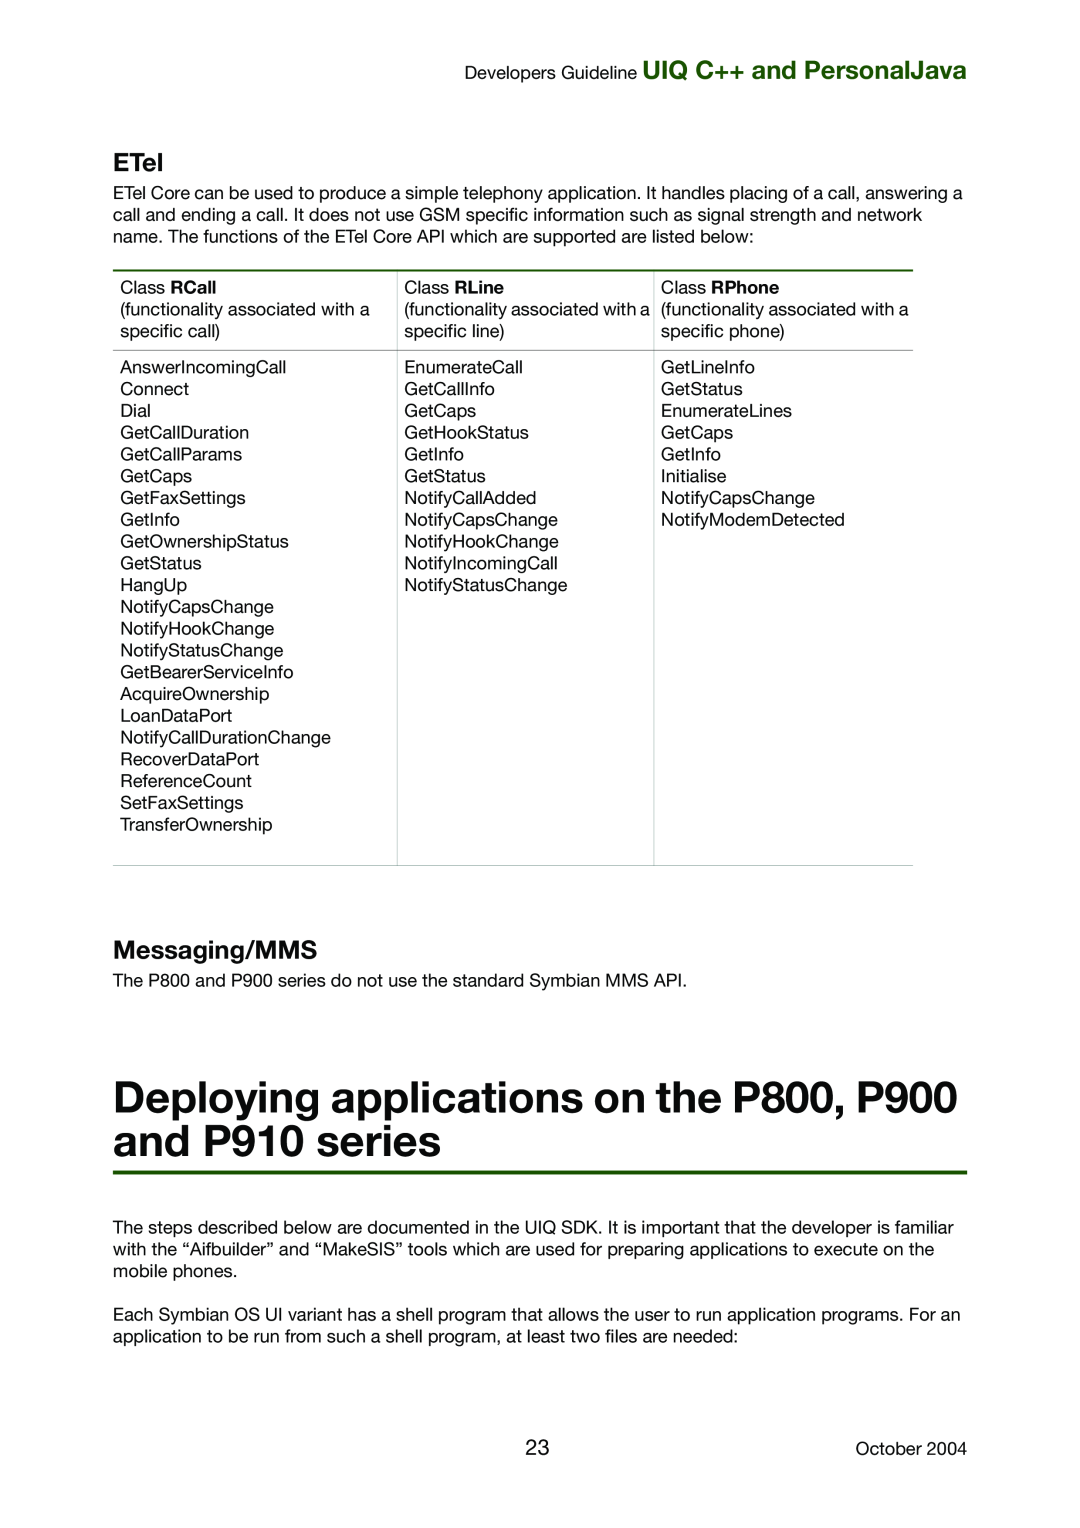 Sony Ericsson manual Deploying applications on the P800, P900 and P910 series, ETel, Messaging/MMS 